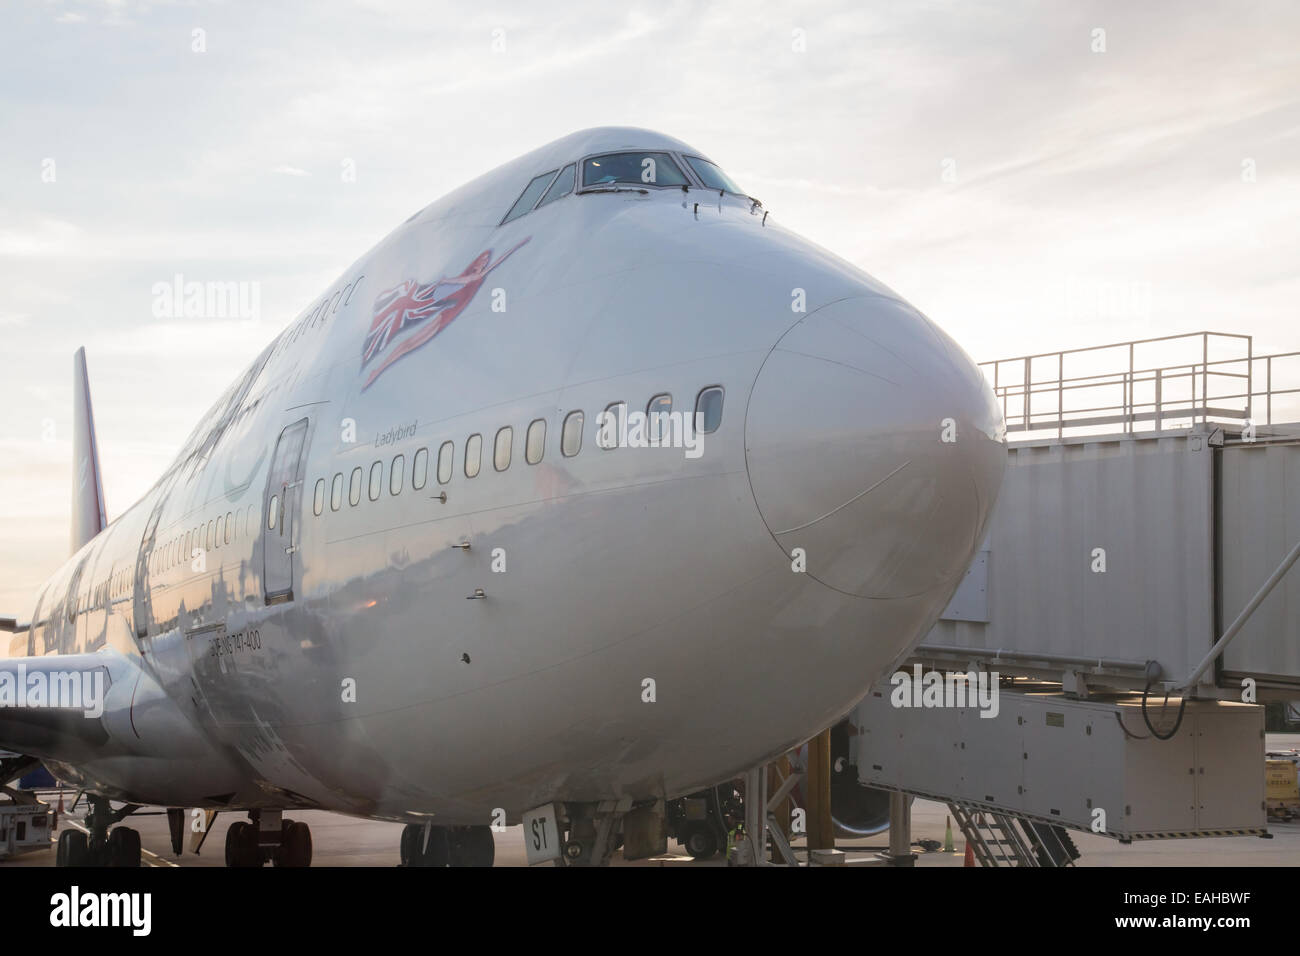 Virgin Atlantic Being 747 at the airport gate waiting for departure. Stock Photo